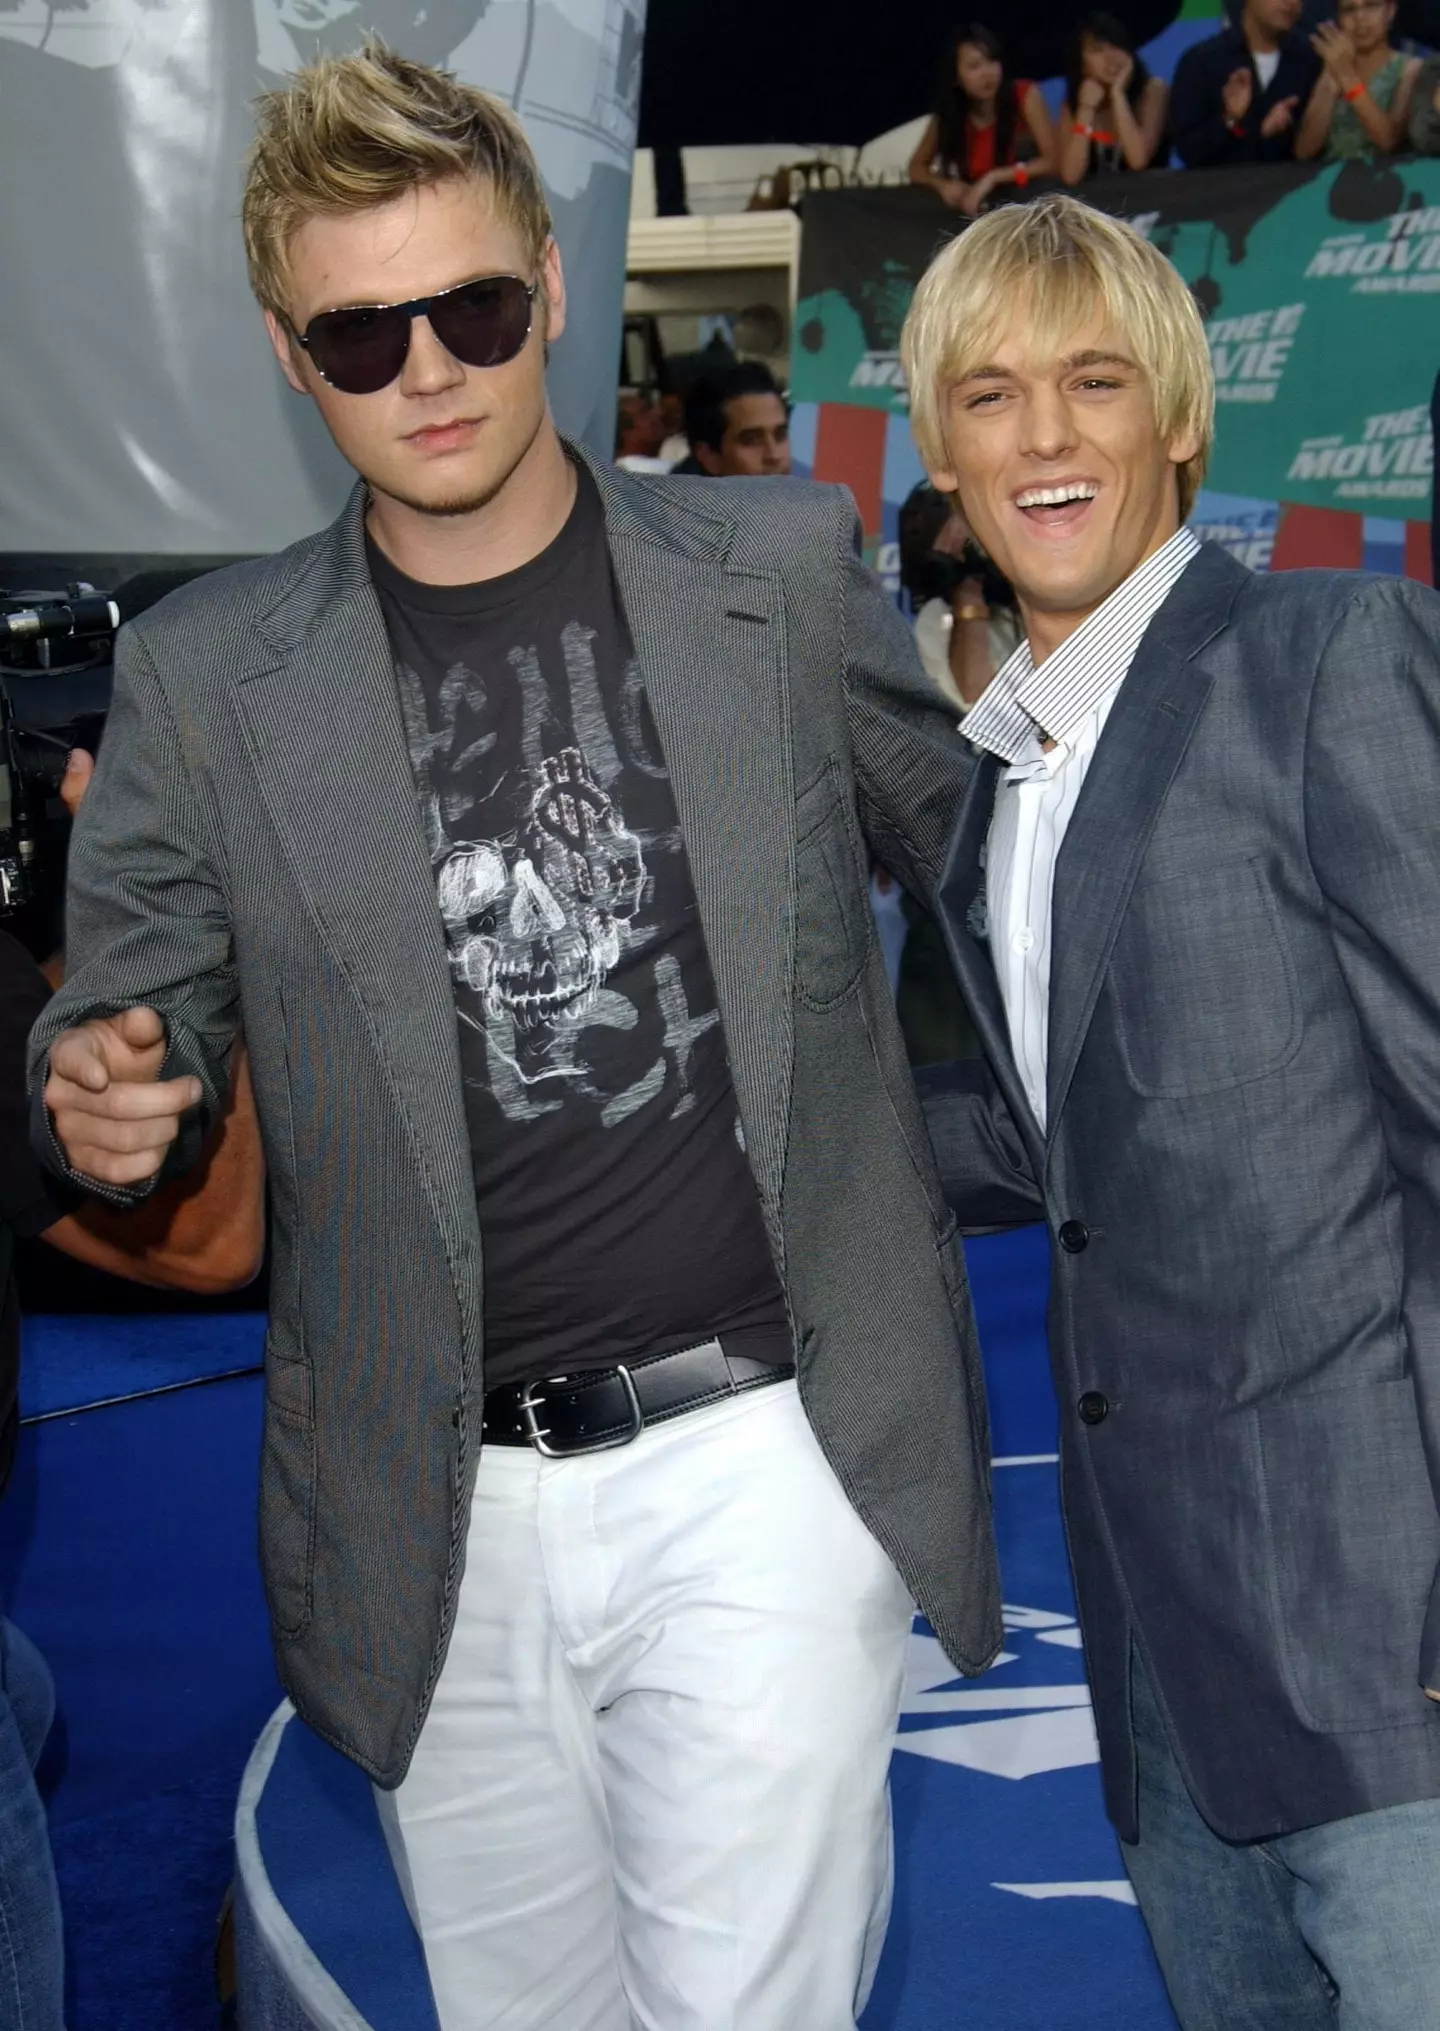 (Left to right) Nick Carter pictured with his brother Aaron.